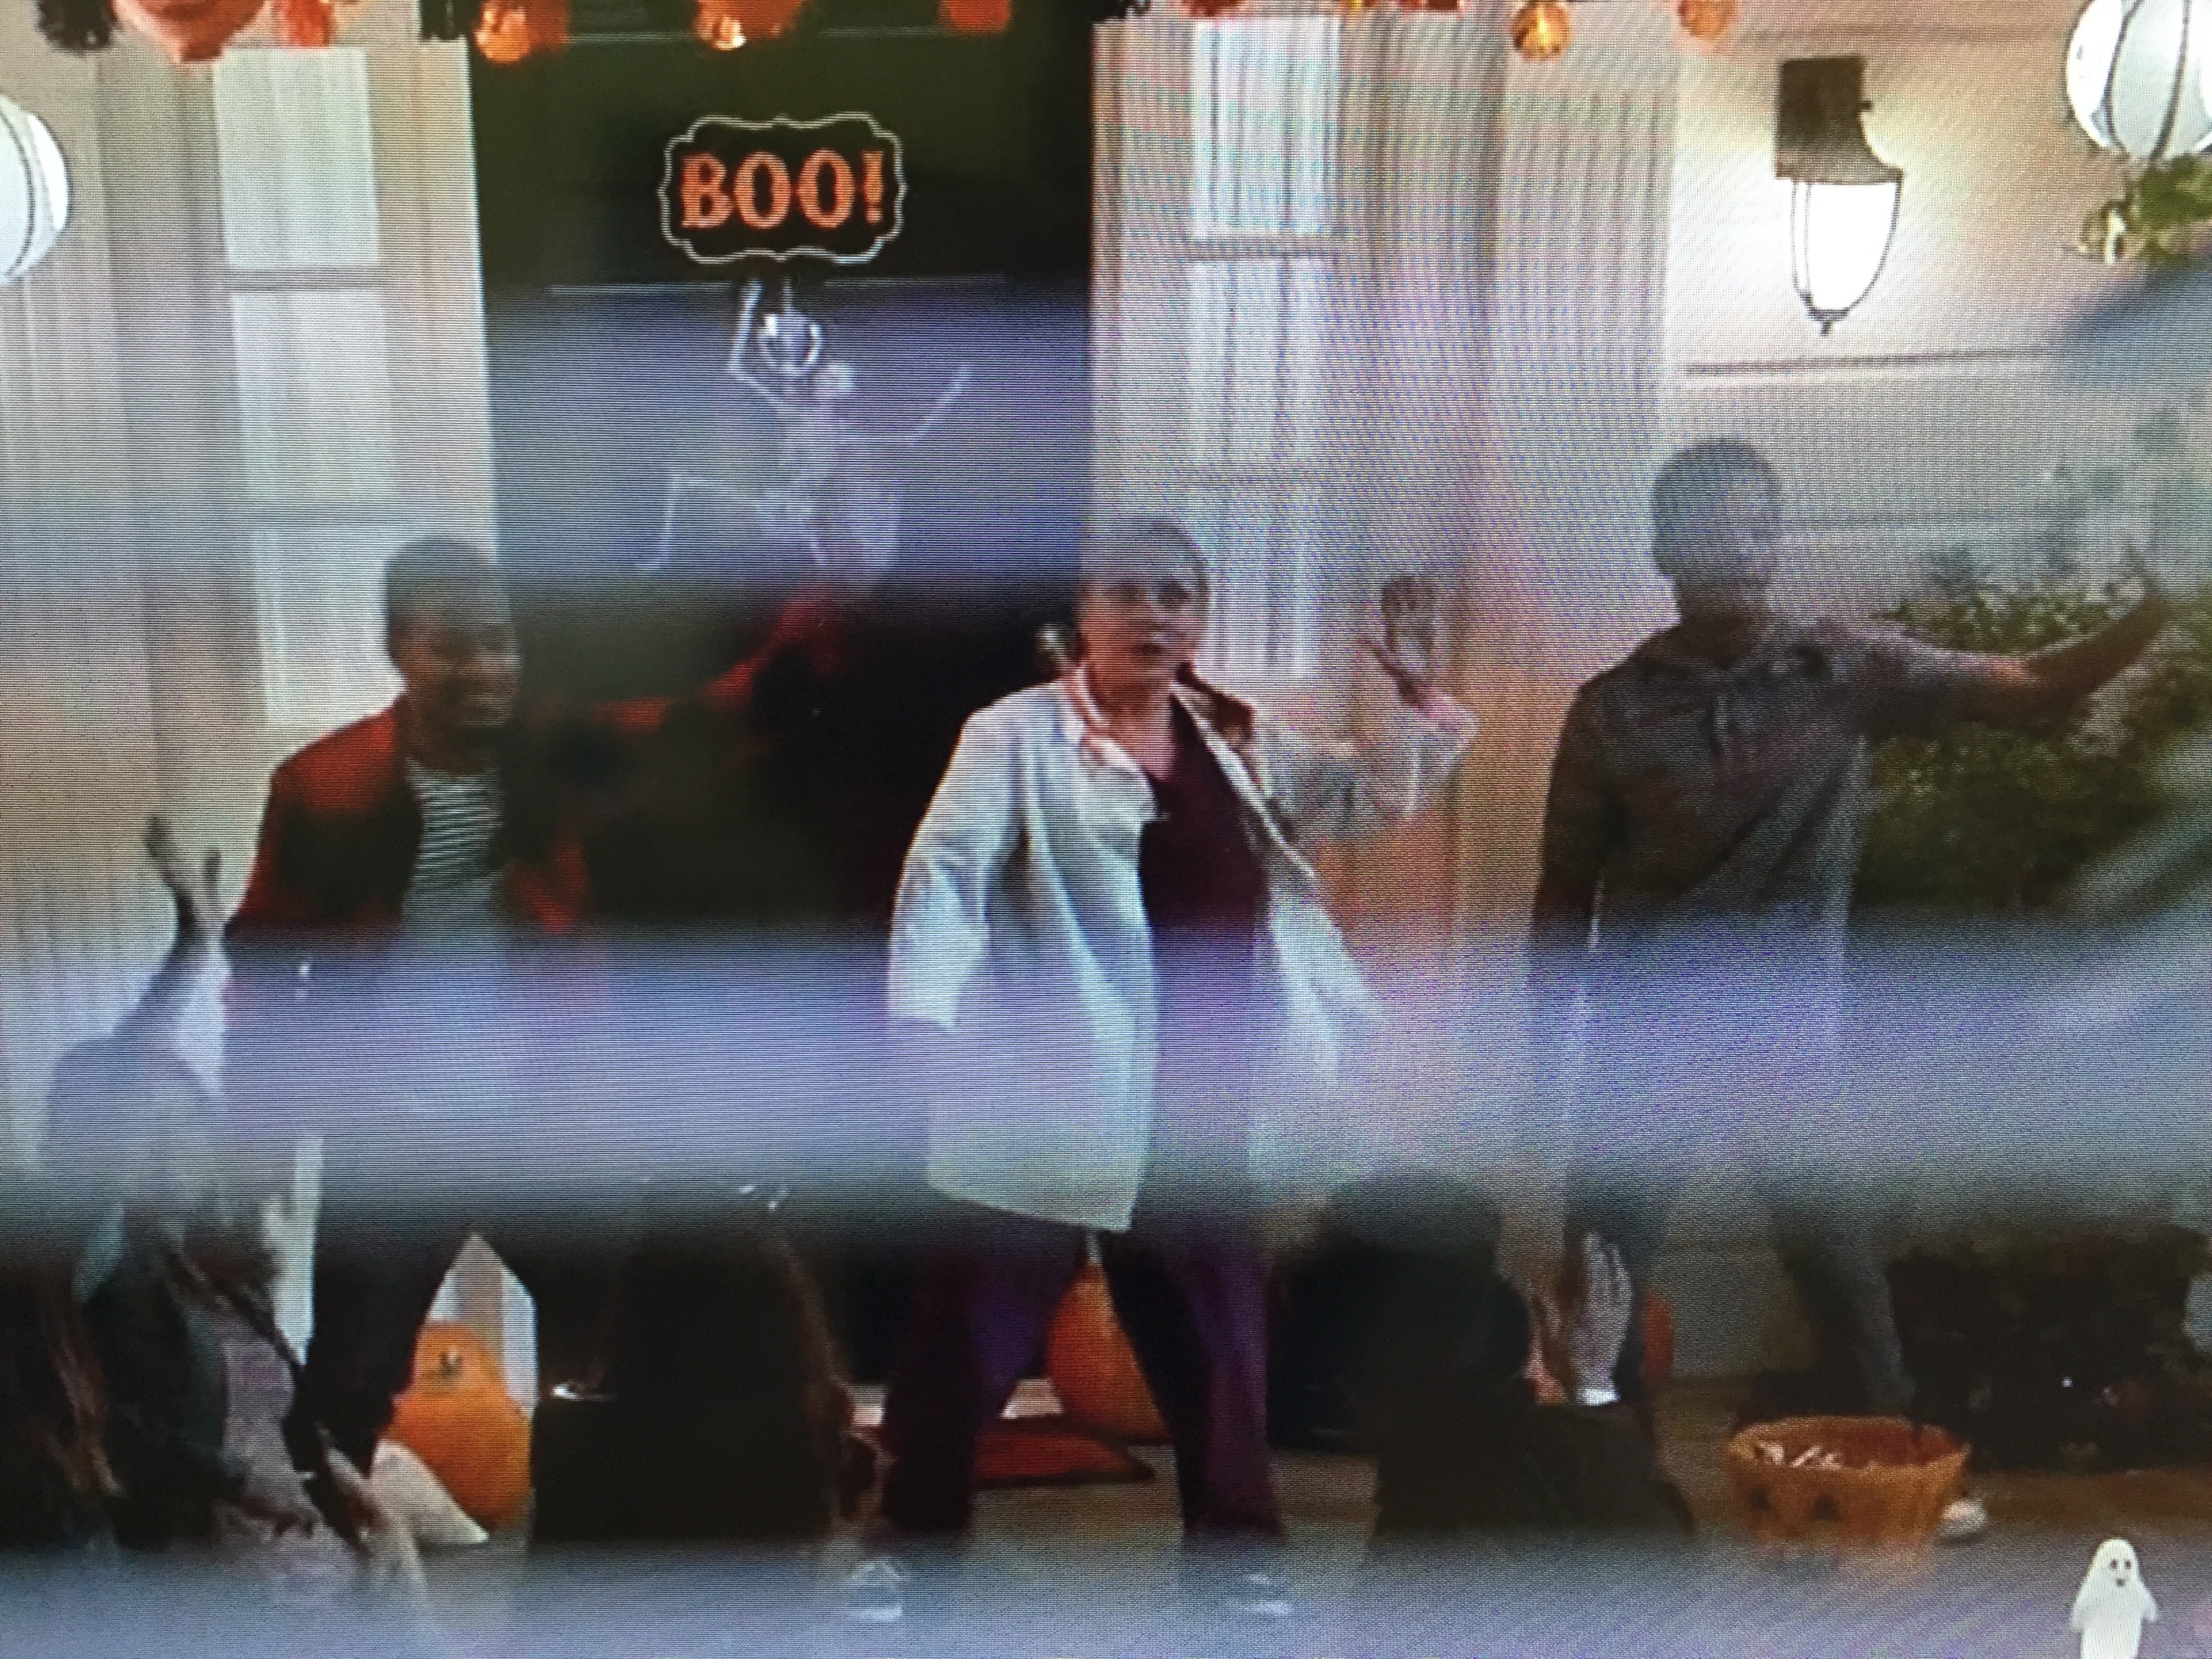 Watch me Whip/Now Watch Me Nae Nae on Black'ish Episode #206, Oct 28, 2015